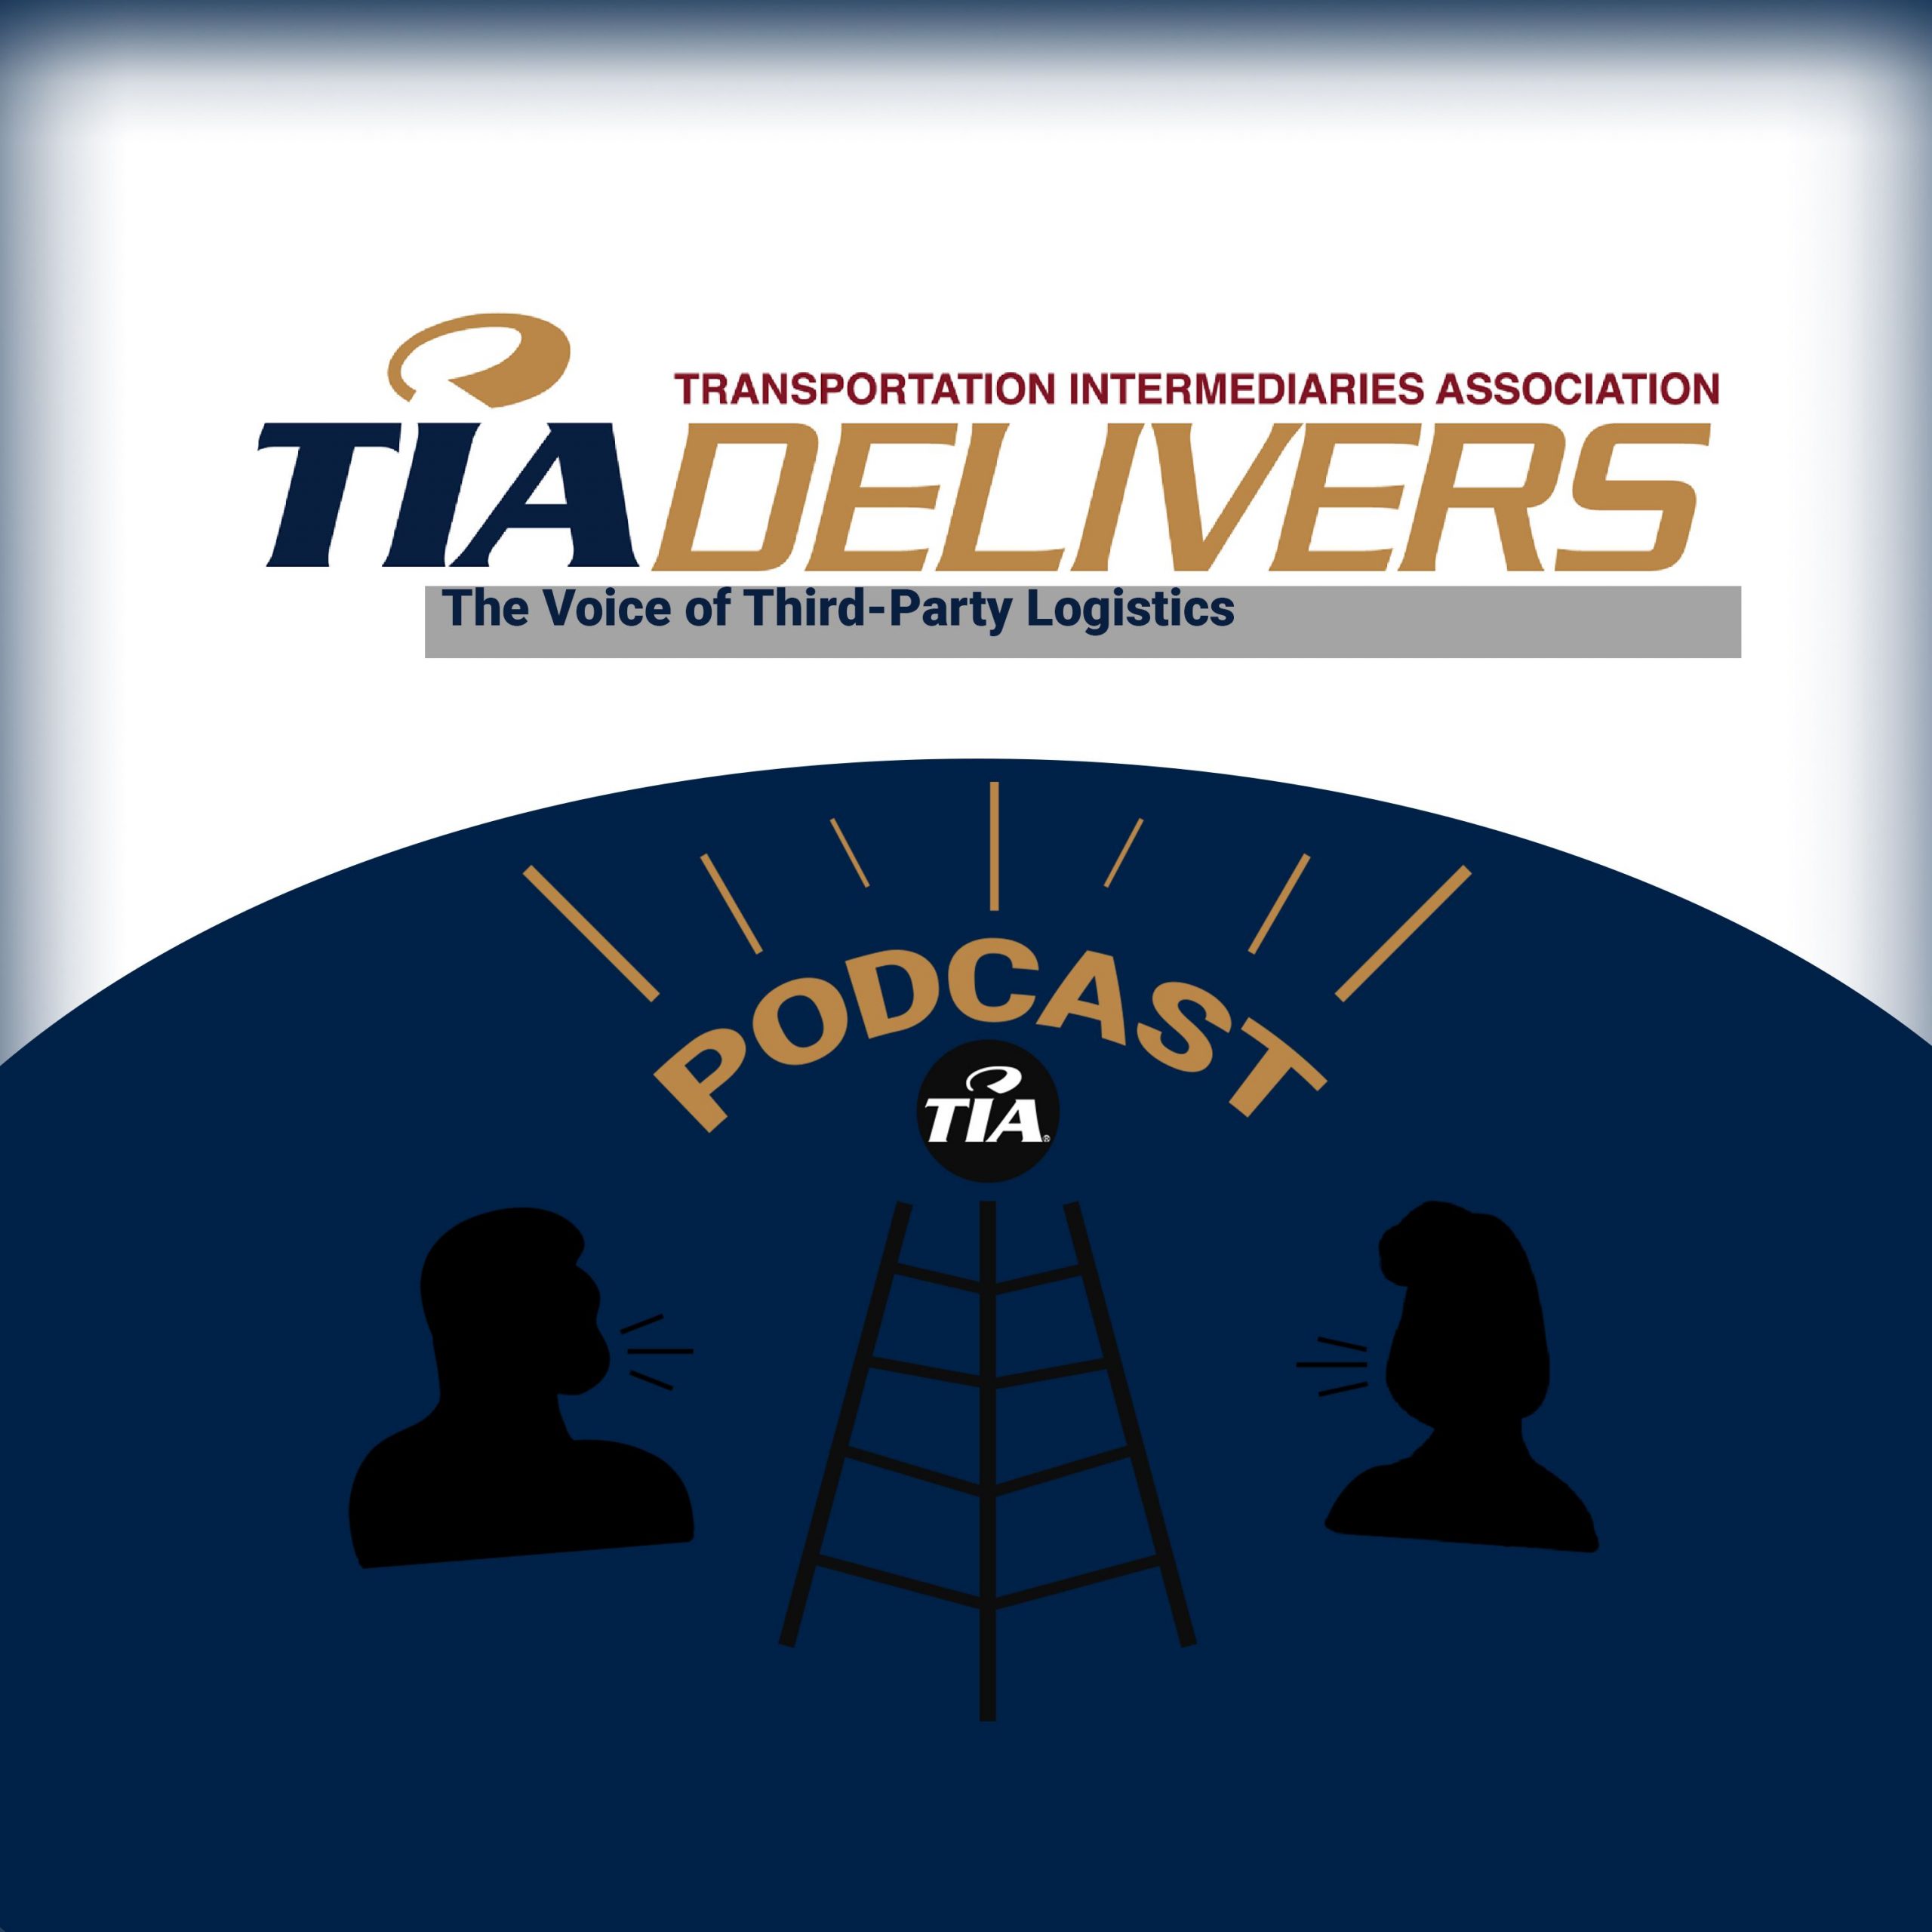 Jim Berlin Interviewed for Episode 8 of the TIA Delivers Podcast